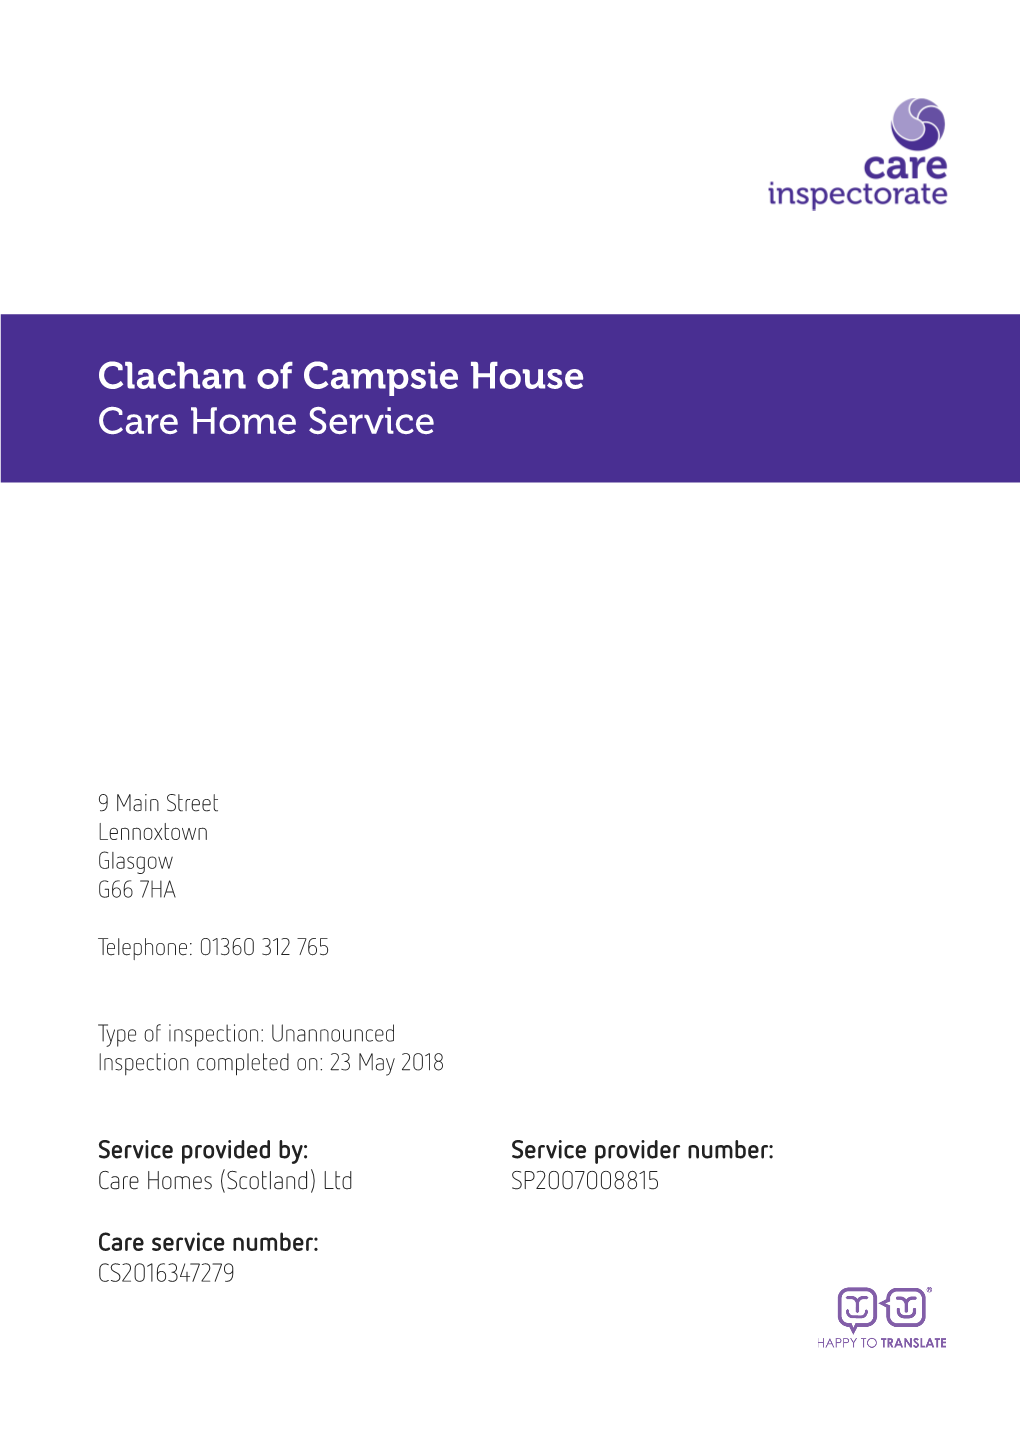 Clachan of Campsie House Care Home Service